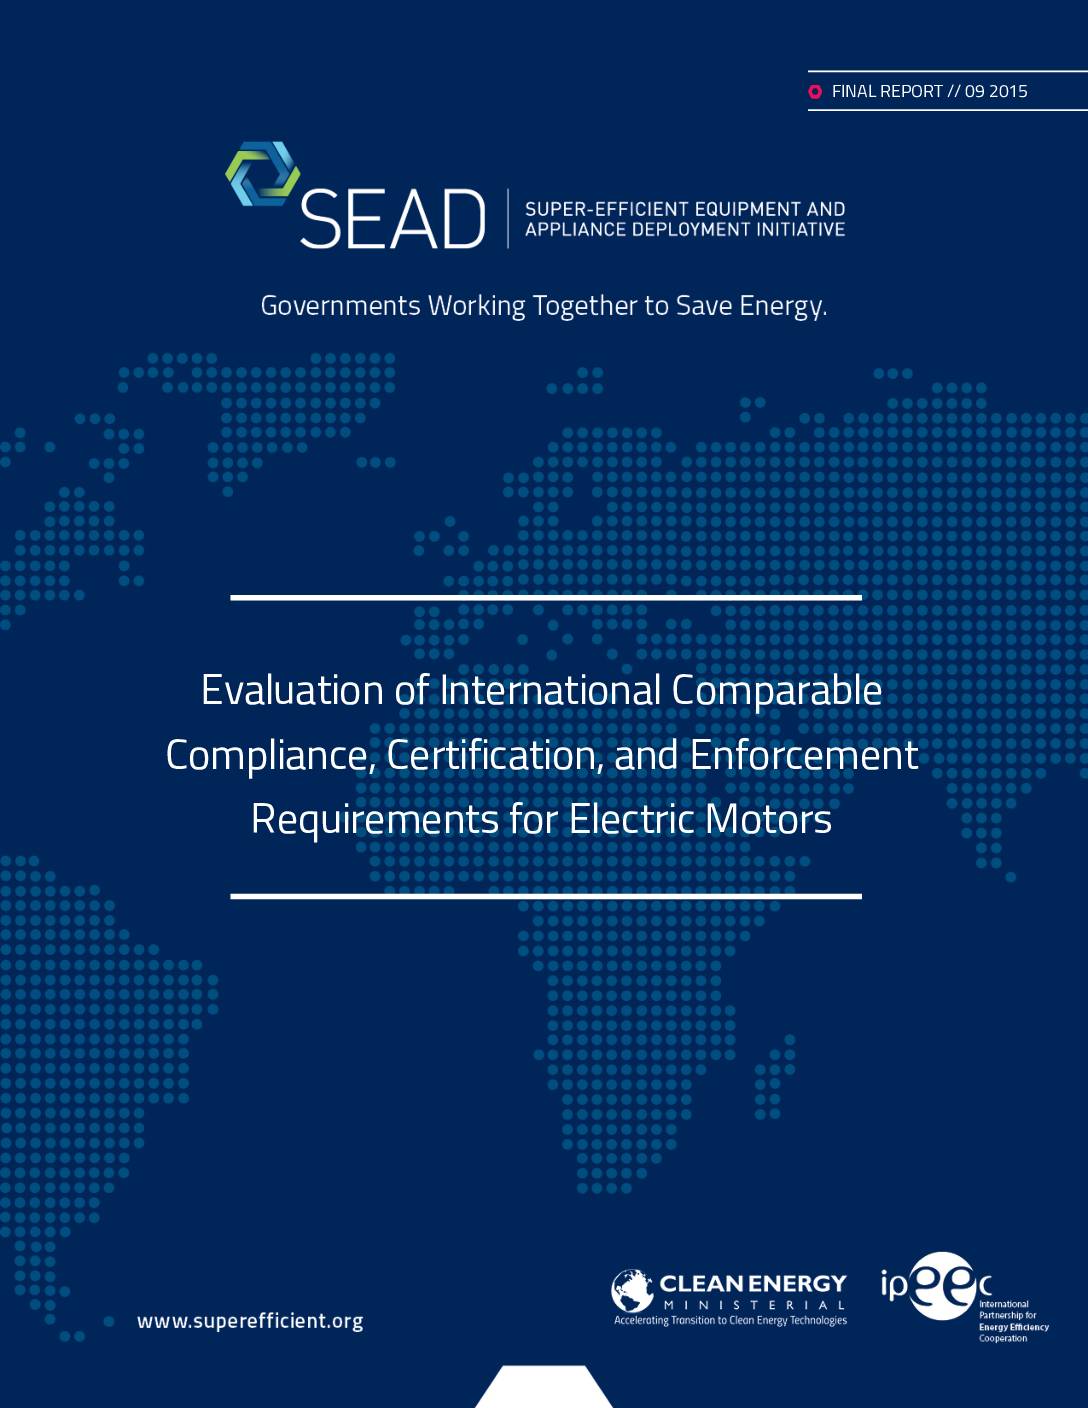 Evaluation of International Comparable Compliance, Certification, and Enforcement Requirements for Electric Motors